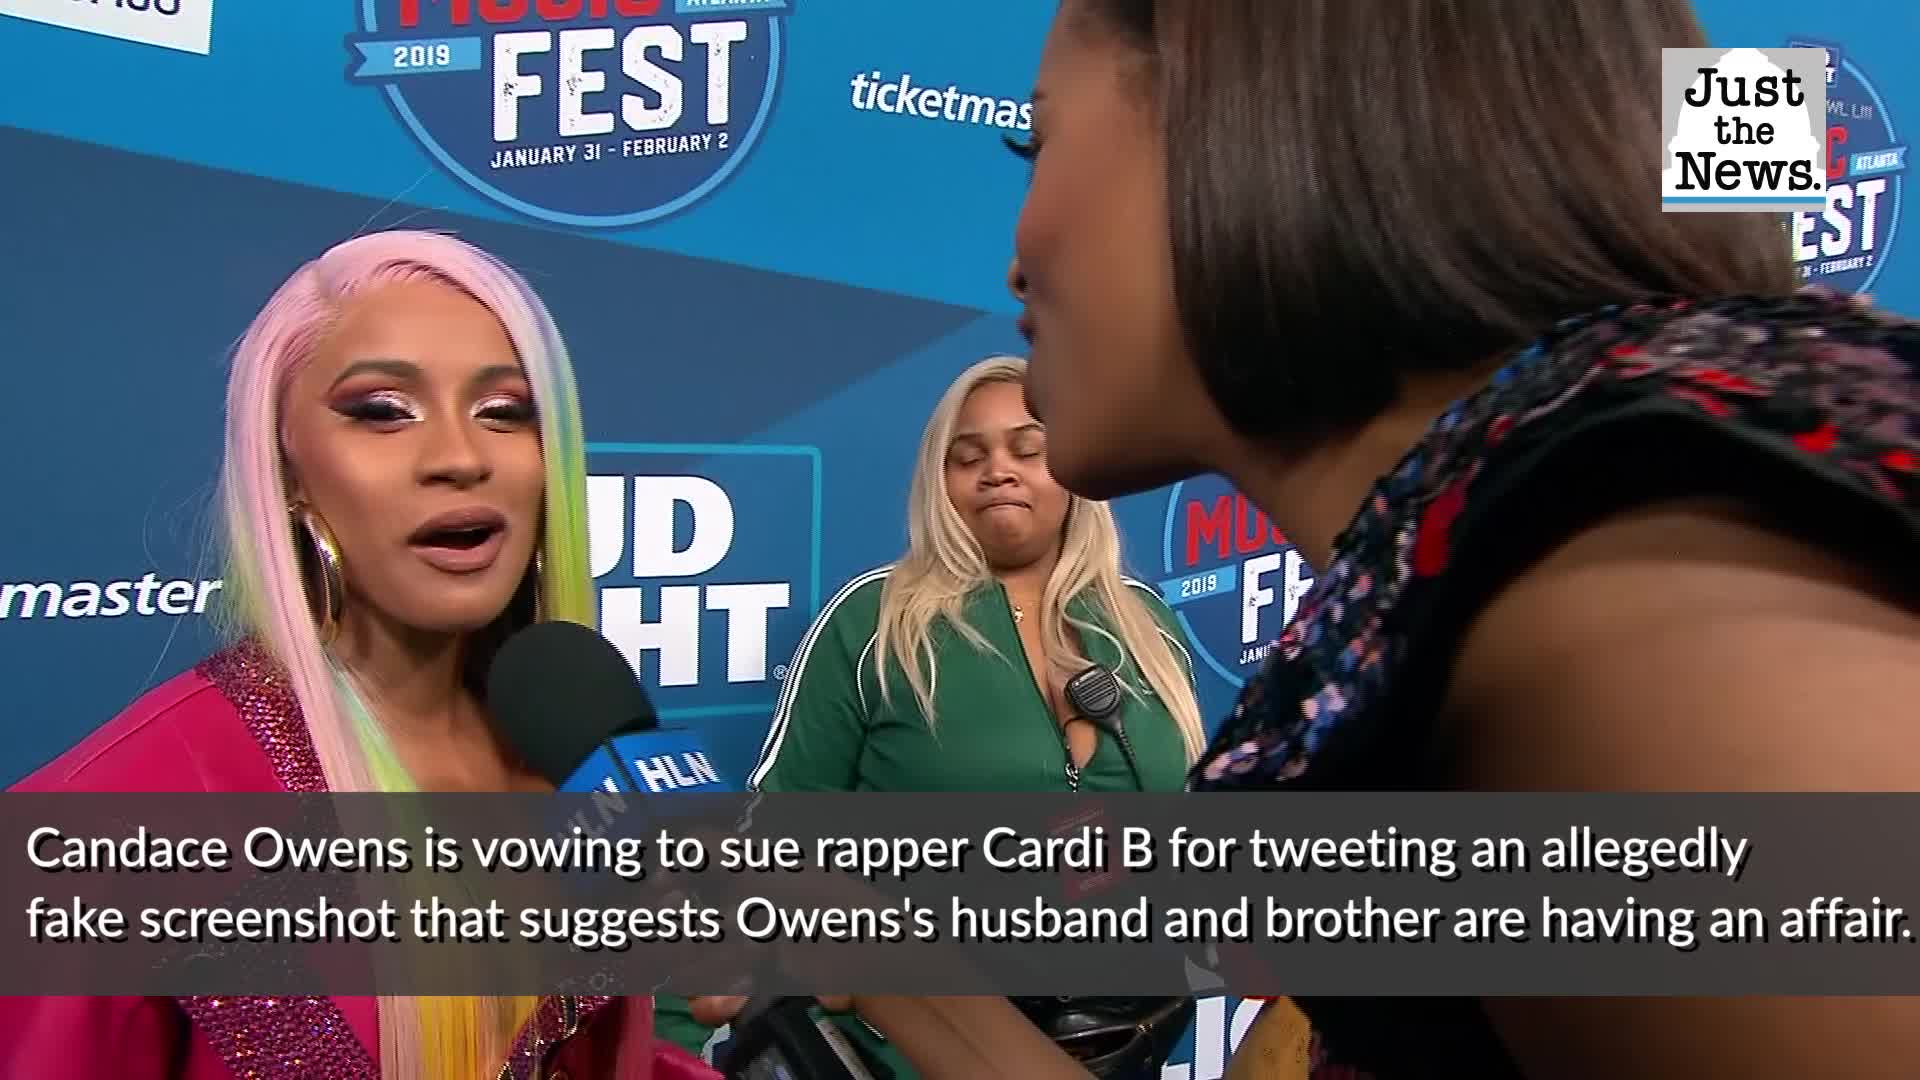 Candace Owens 100 Suing Rapper Cardi B For Twitter Screenshot She Says Was Defamatory